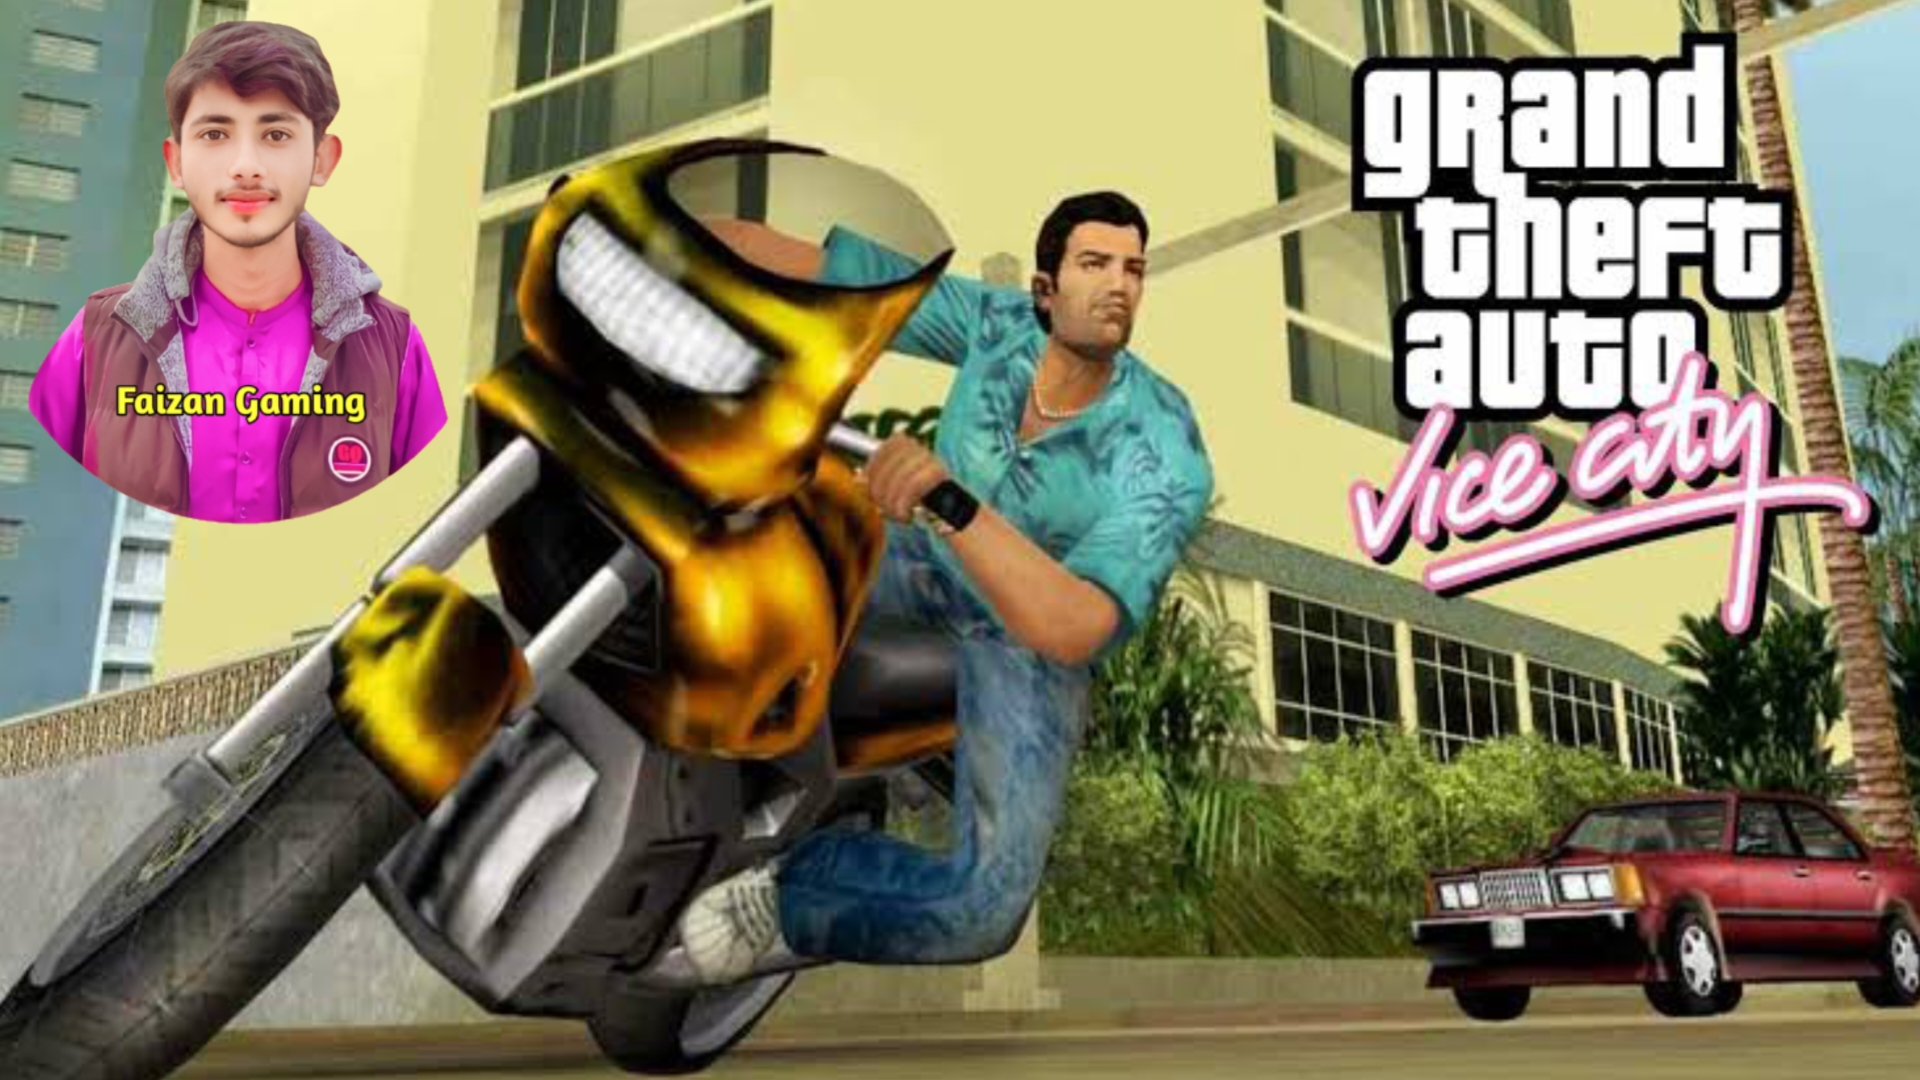 How to Download GTA Vice City? Game Installation and Gameplay